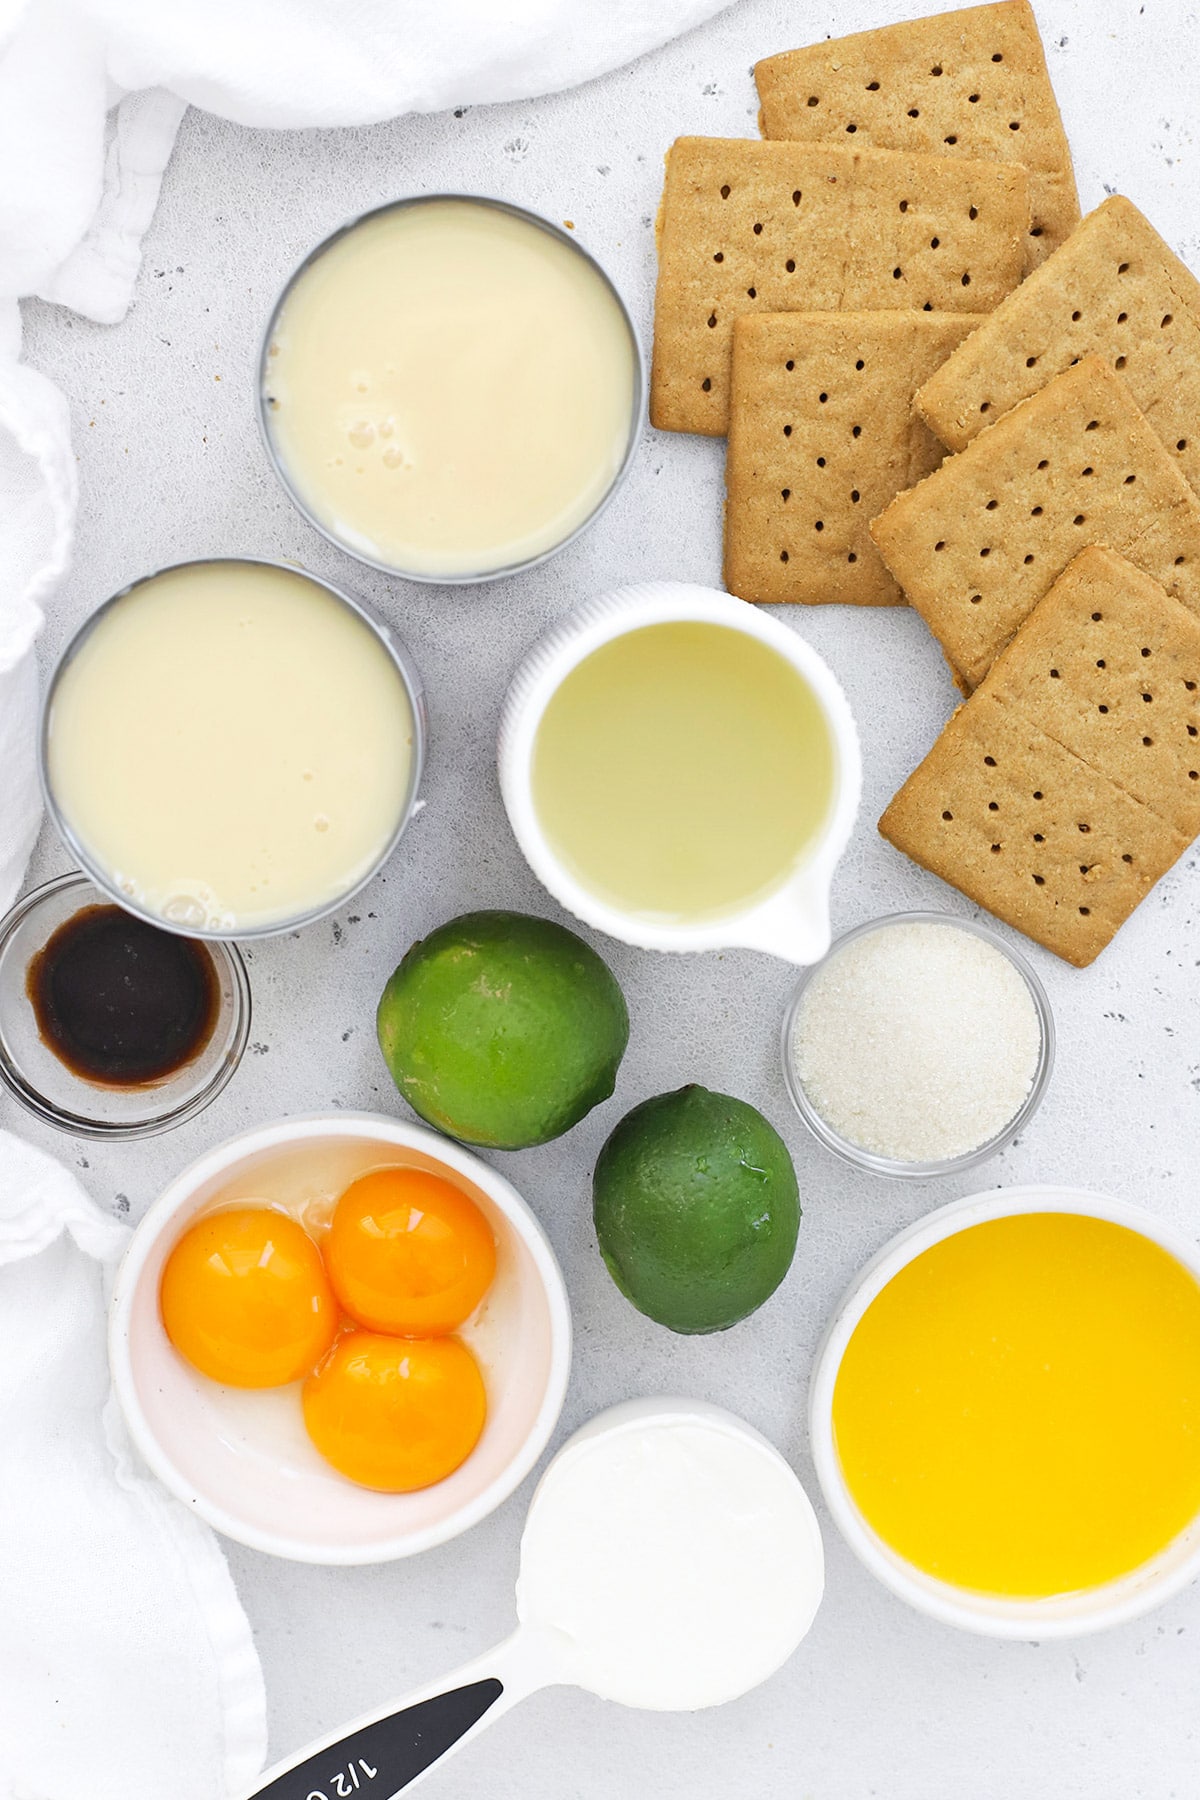 Overhead view of ingredients for gluten-free key lime pie bars